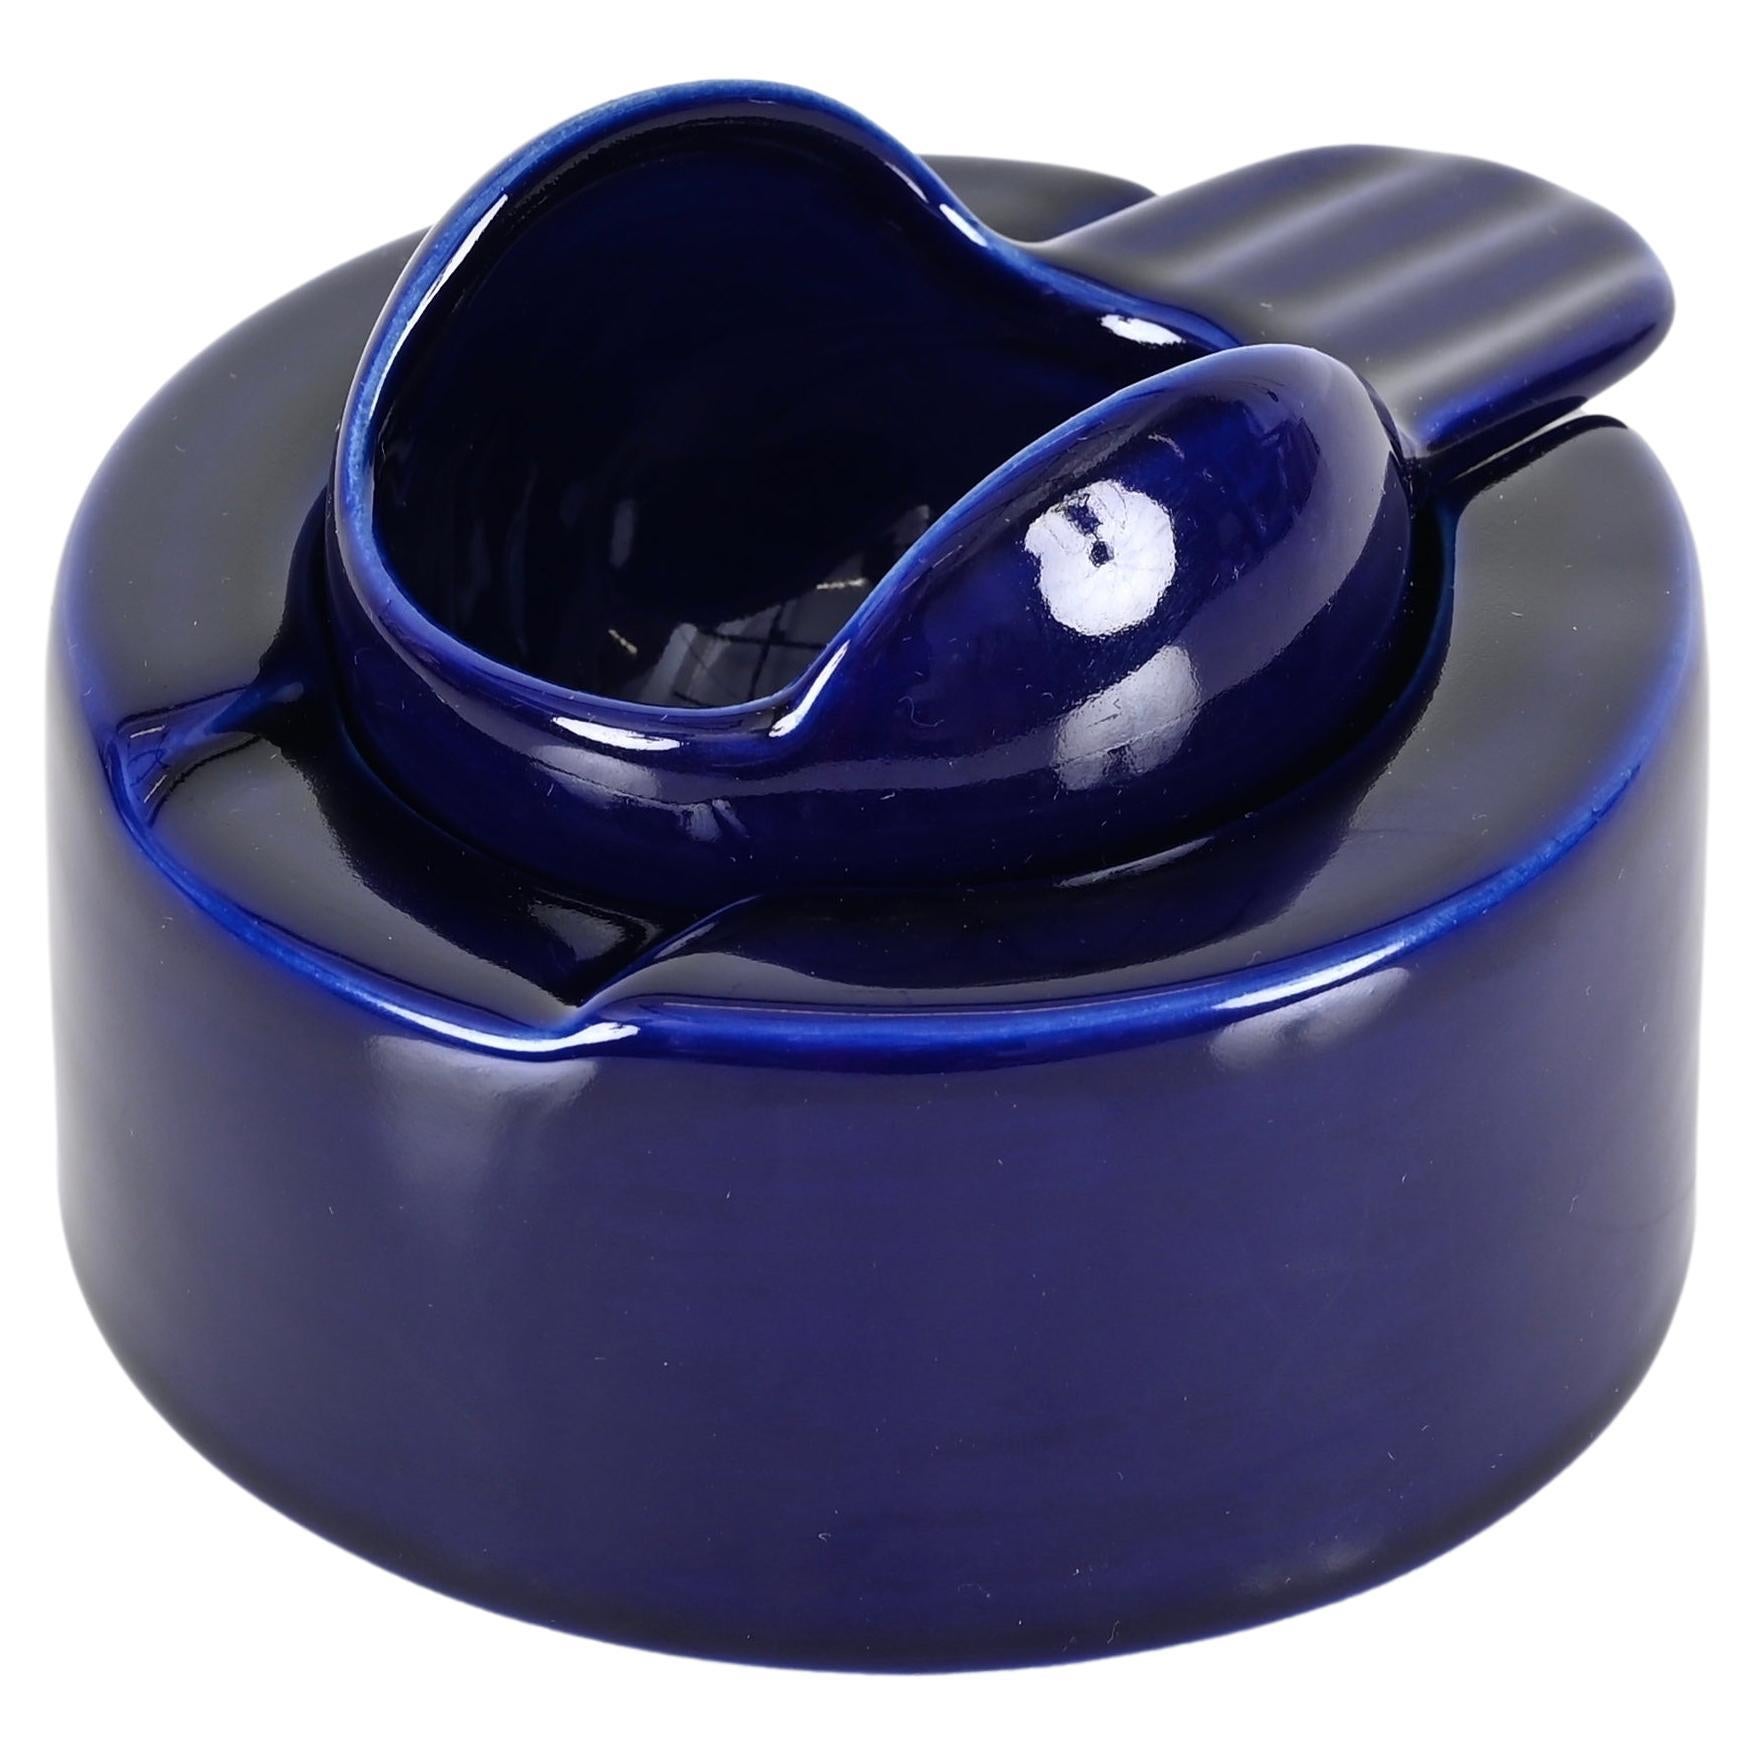 Stunning cobalt blue ceramic ashtray designed by Angelo Mangiarotti and produced by Frateklli Brambilla in Italy in the 1970s.

This gorgeous two piece ashtray features a top that can rotate over the base to close or open the ashtray. The quality of